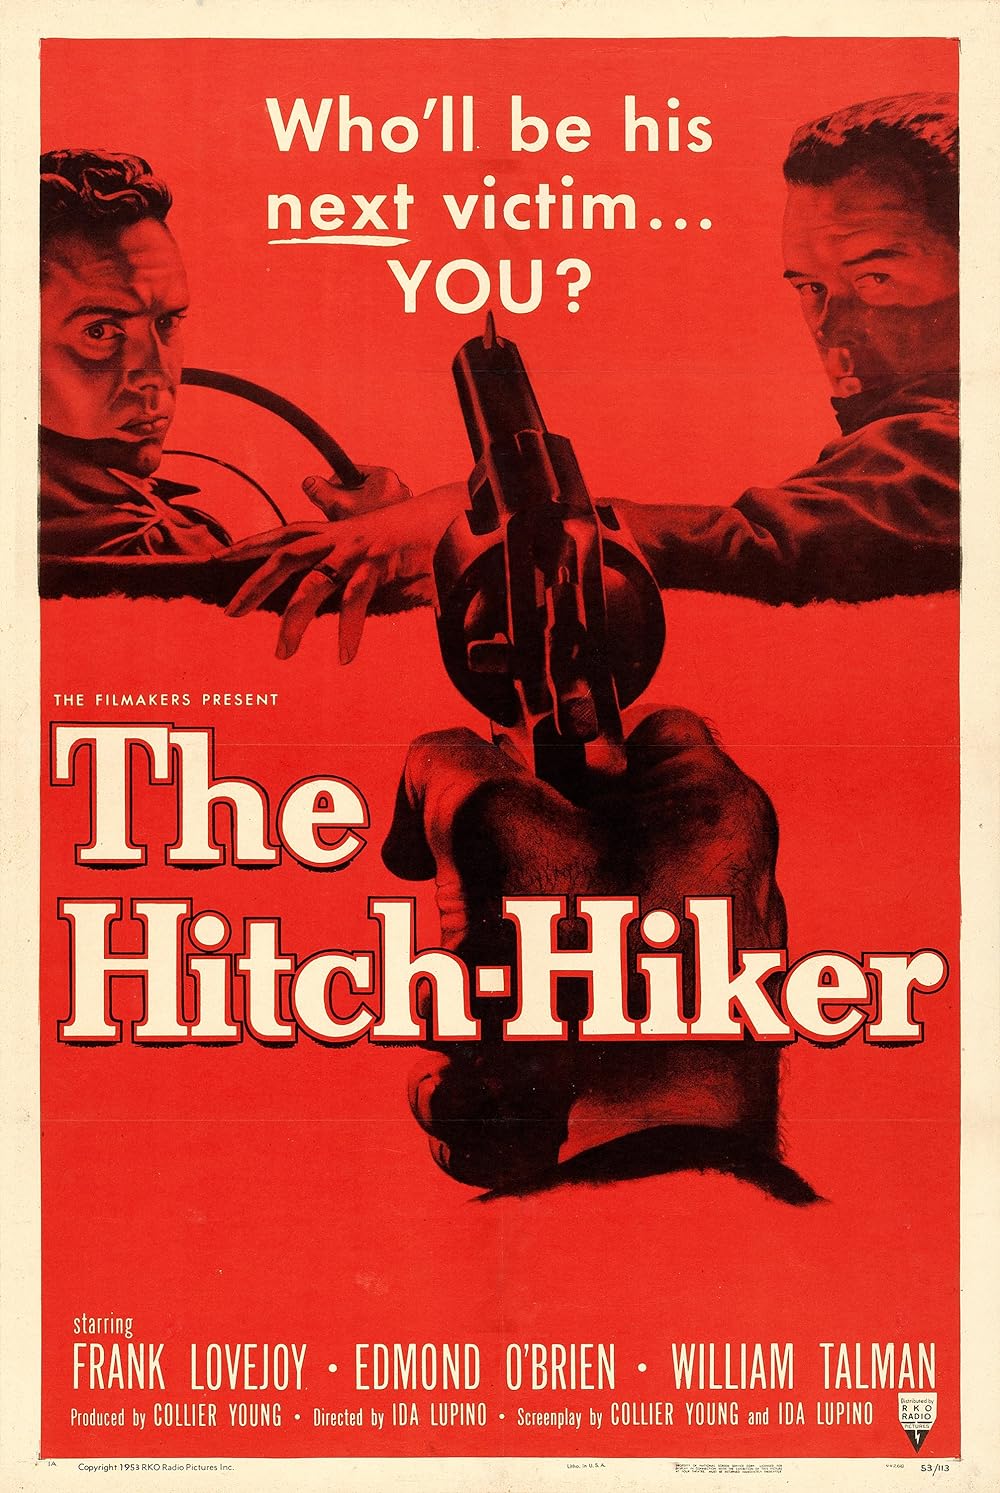 The Hitch-hiker